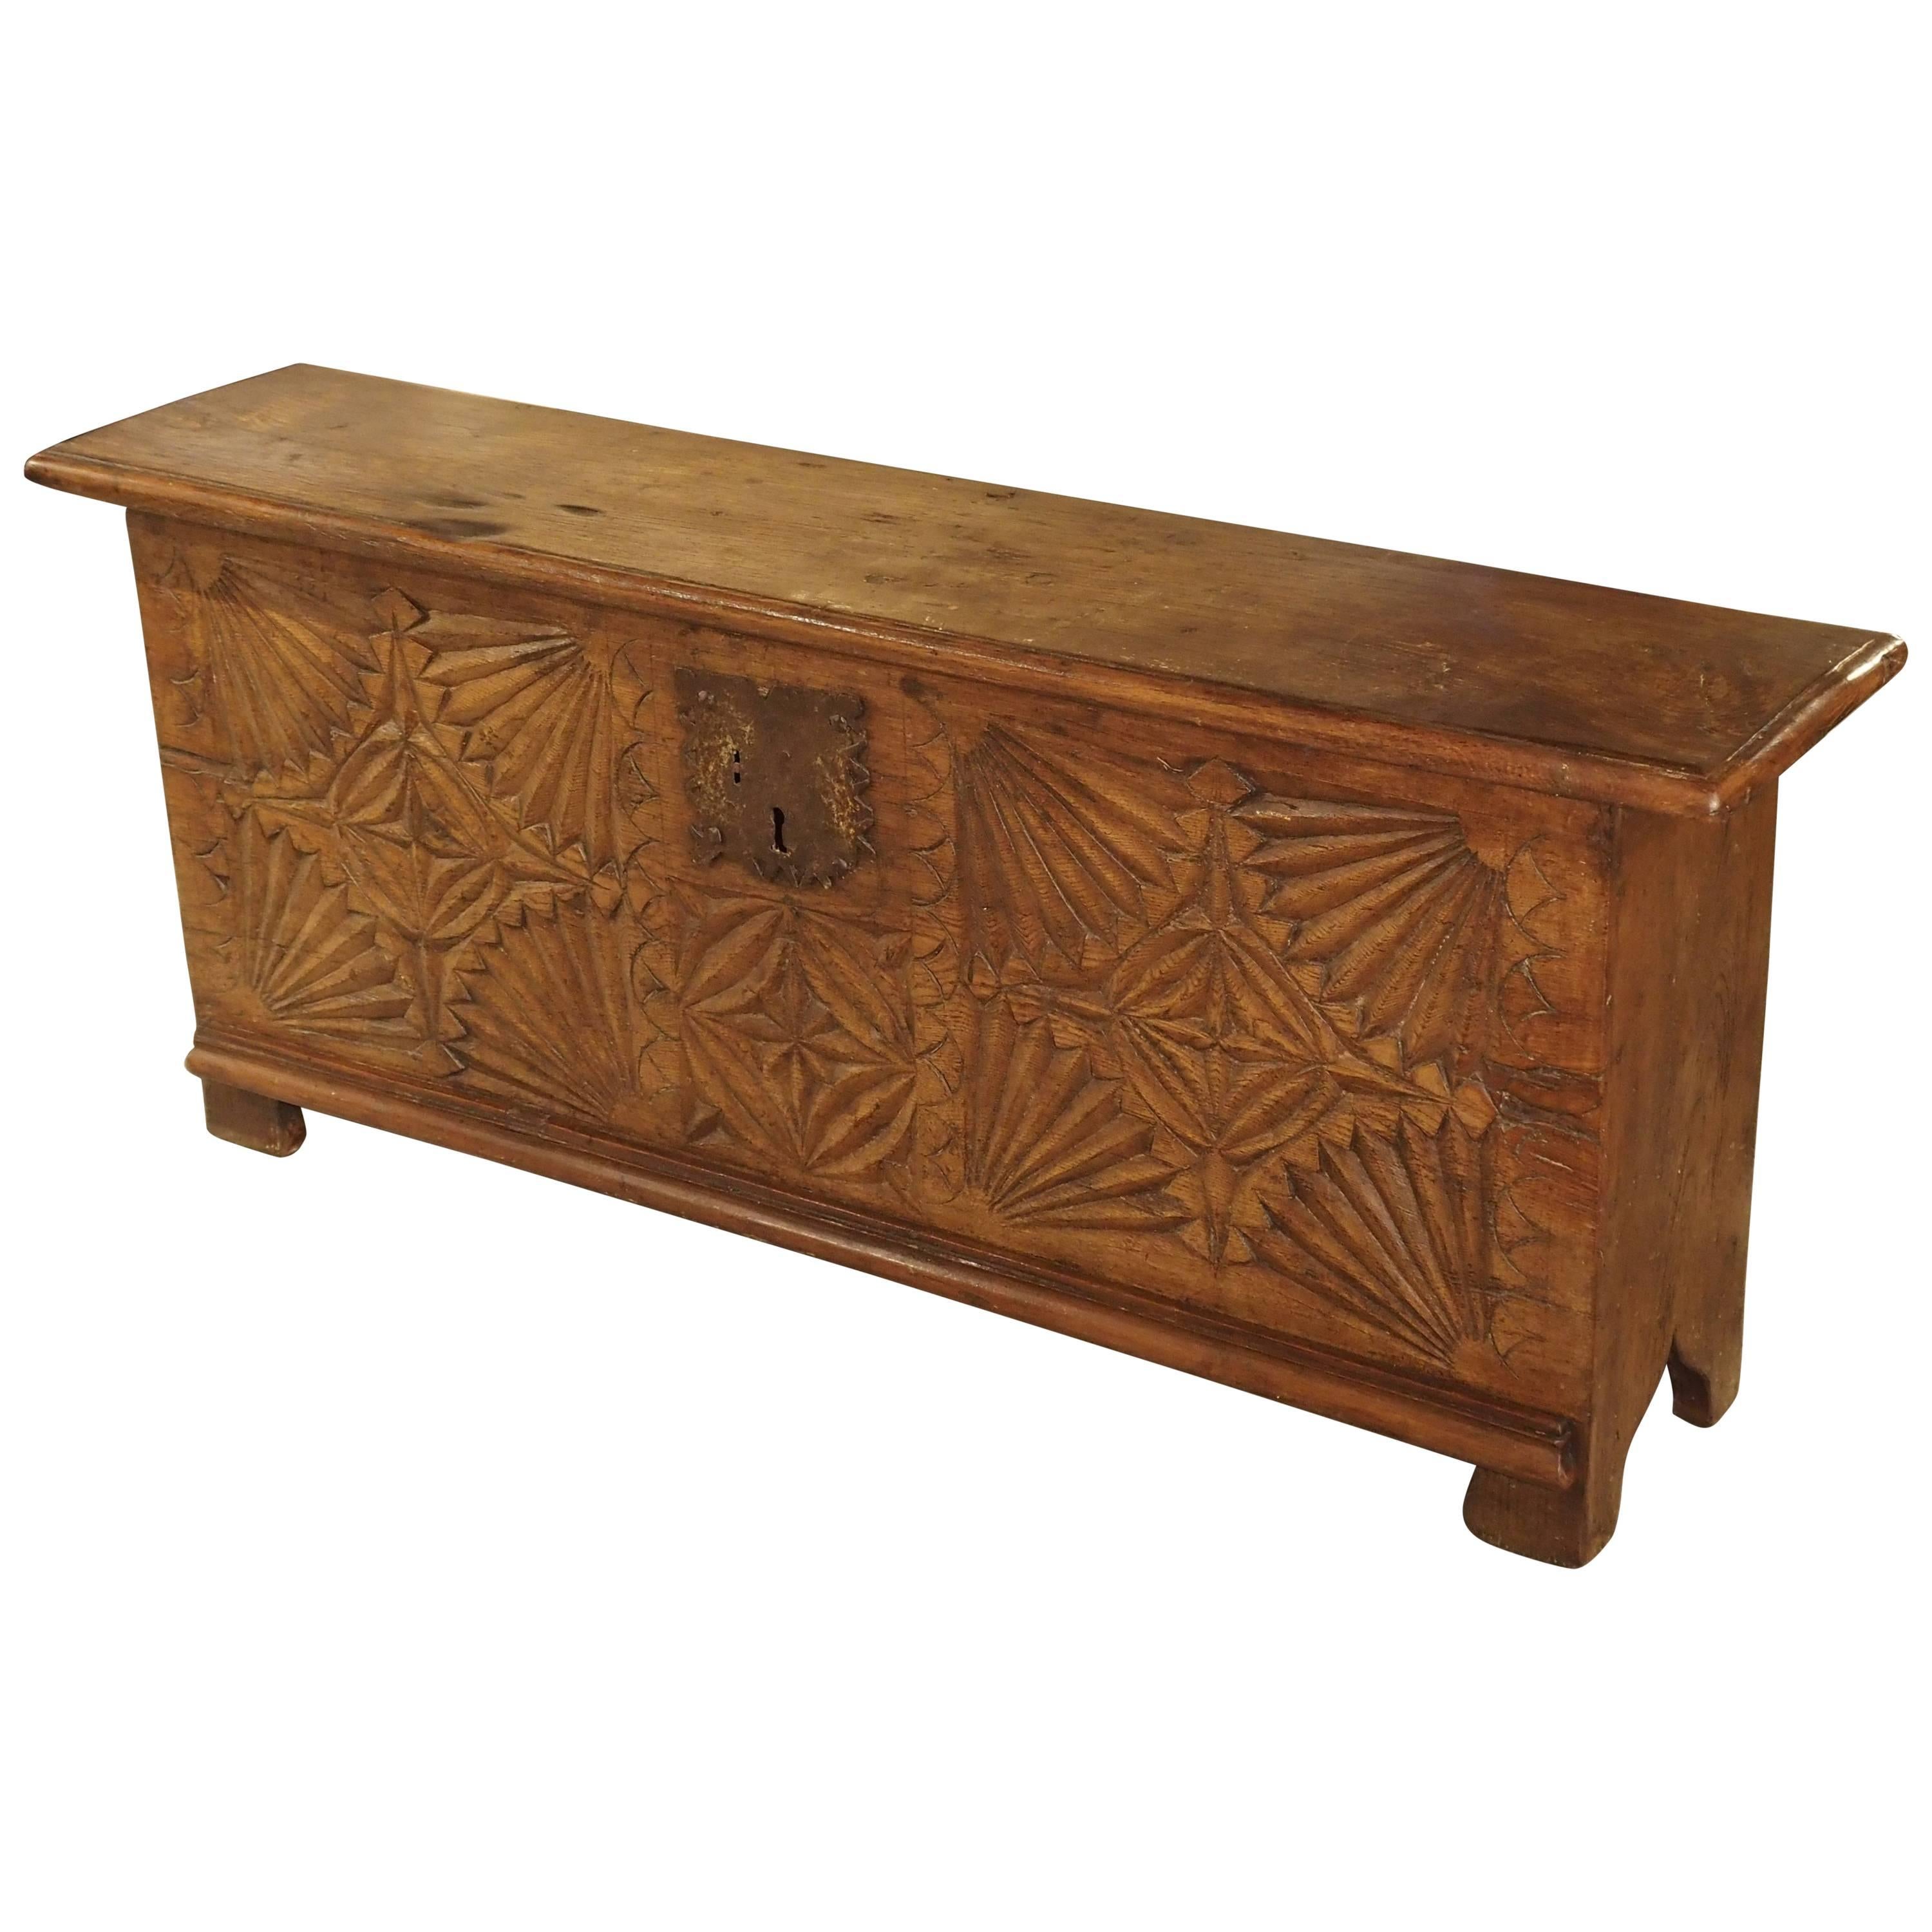 Oak Trunk from France with Detailed Hand-Carved Front Panel